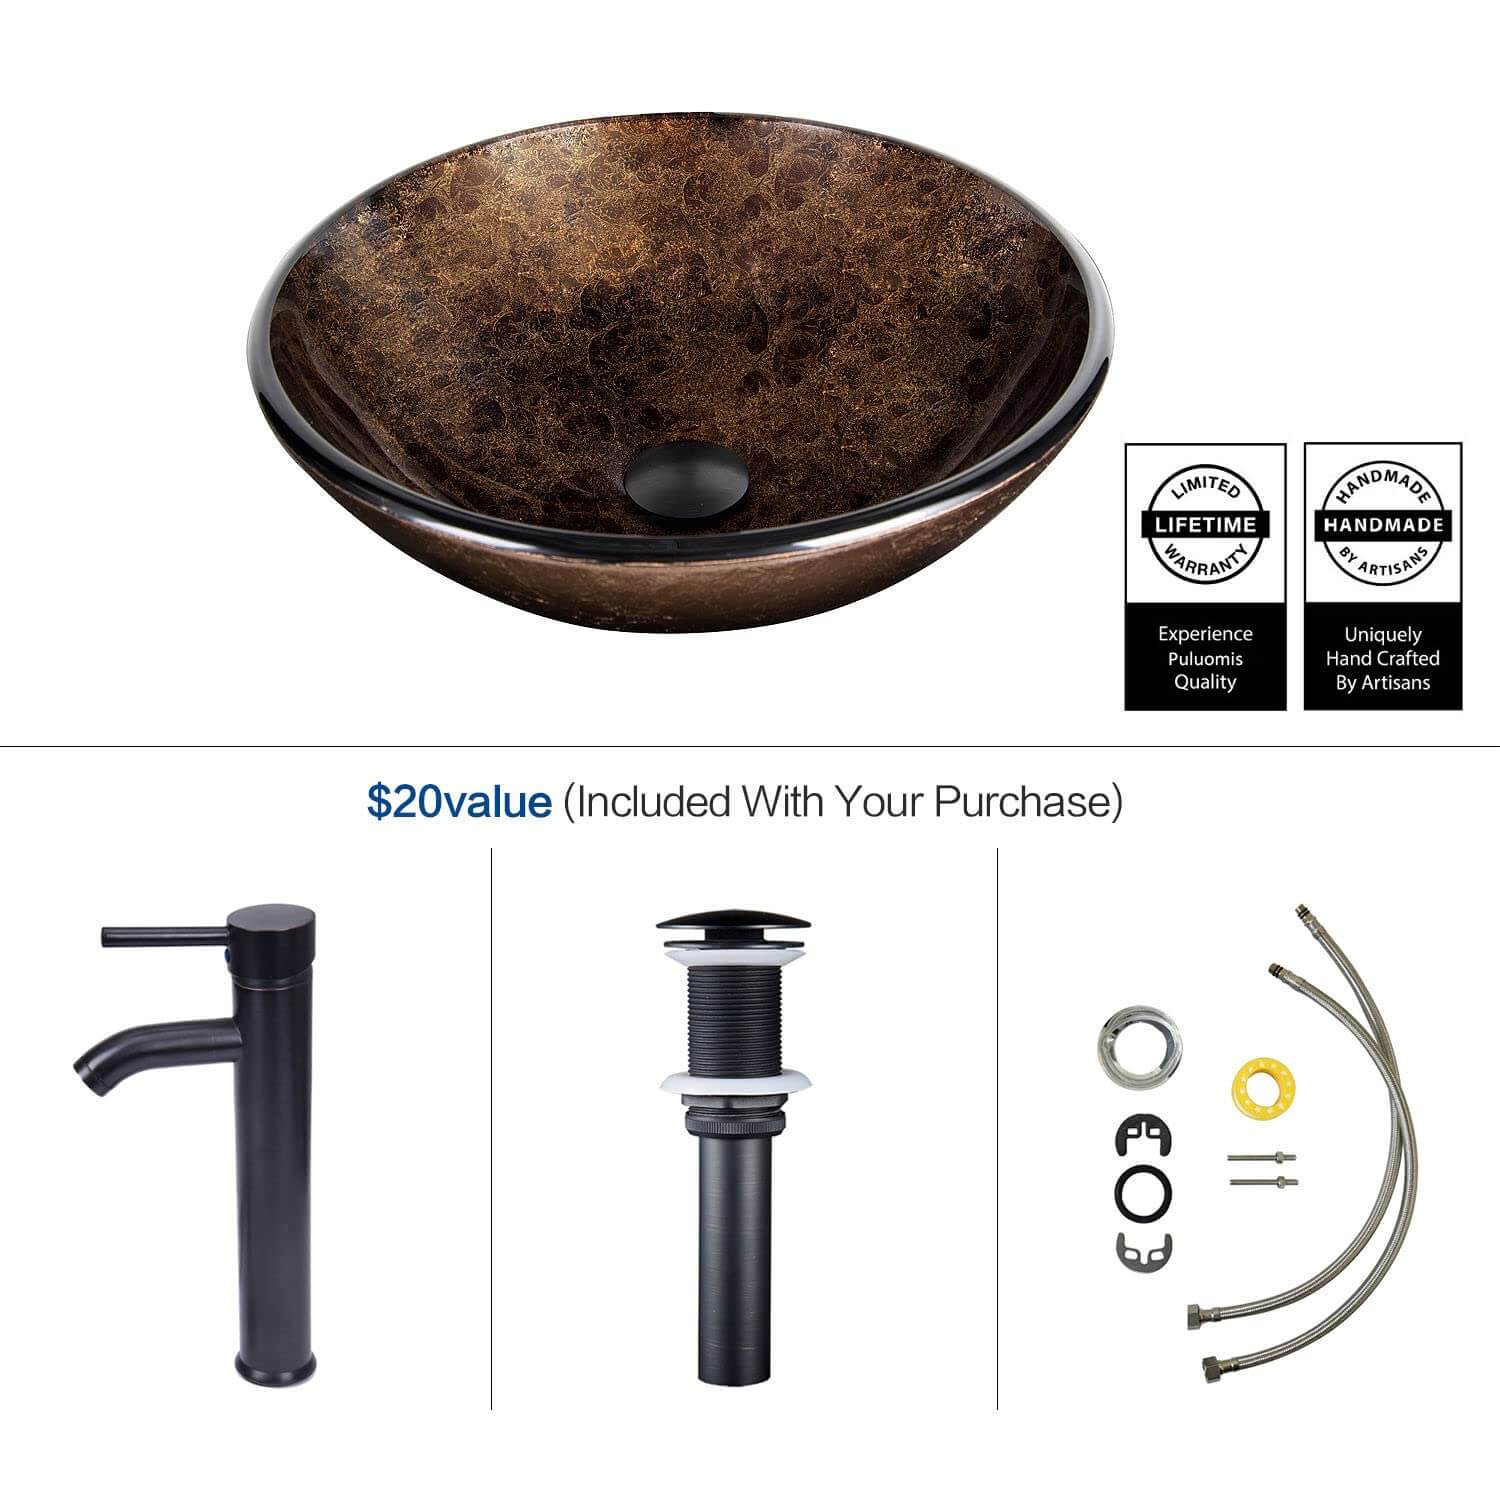 Elecwish Brown Round Sink included parts